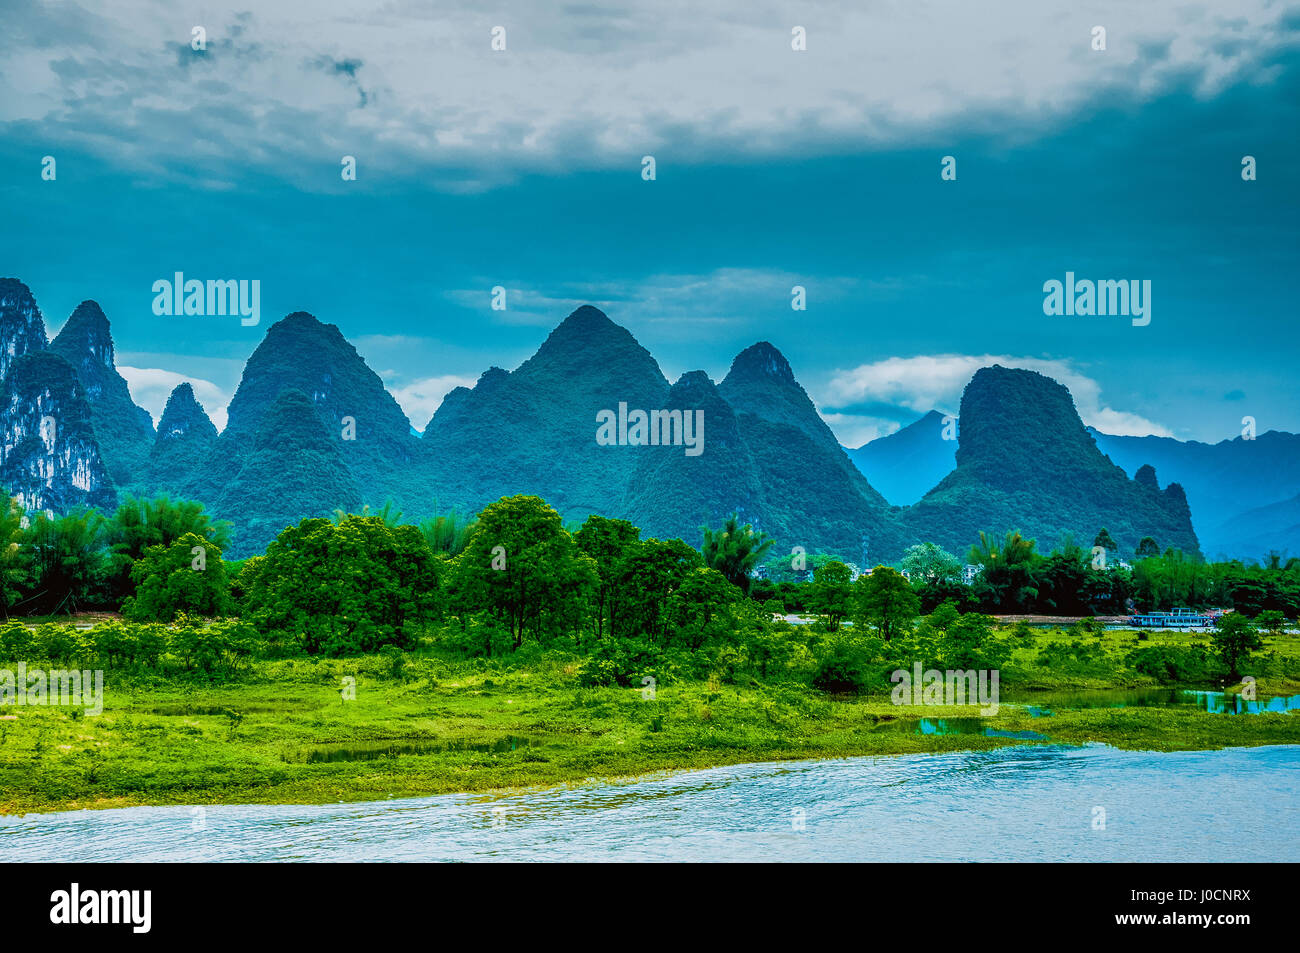 Karst mountains and Lijiang River scenery in the mist Stock Photo